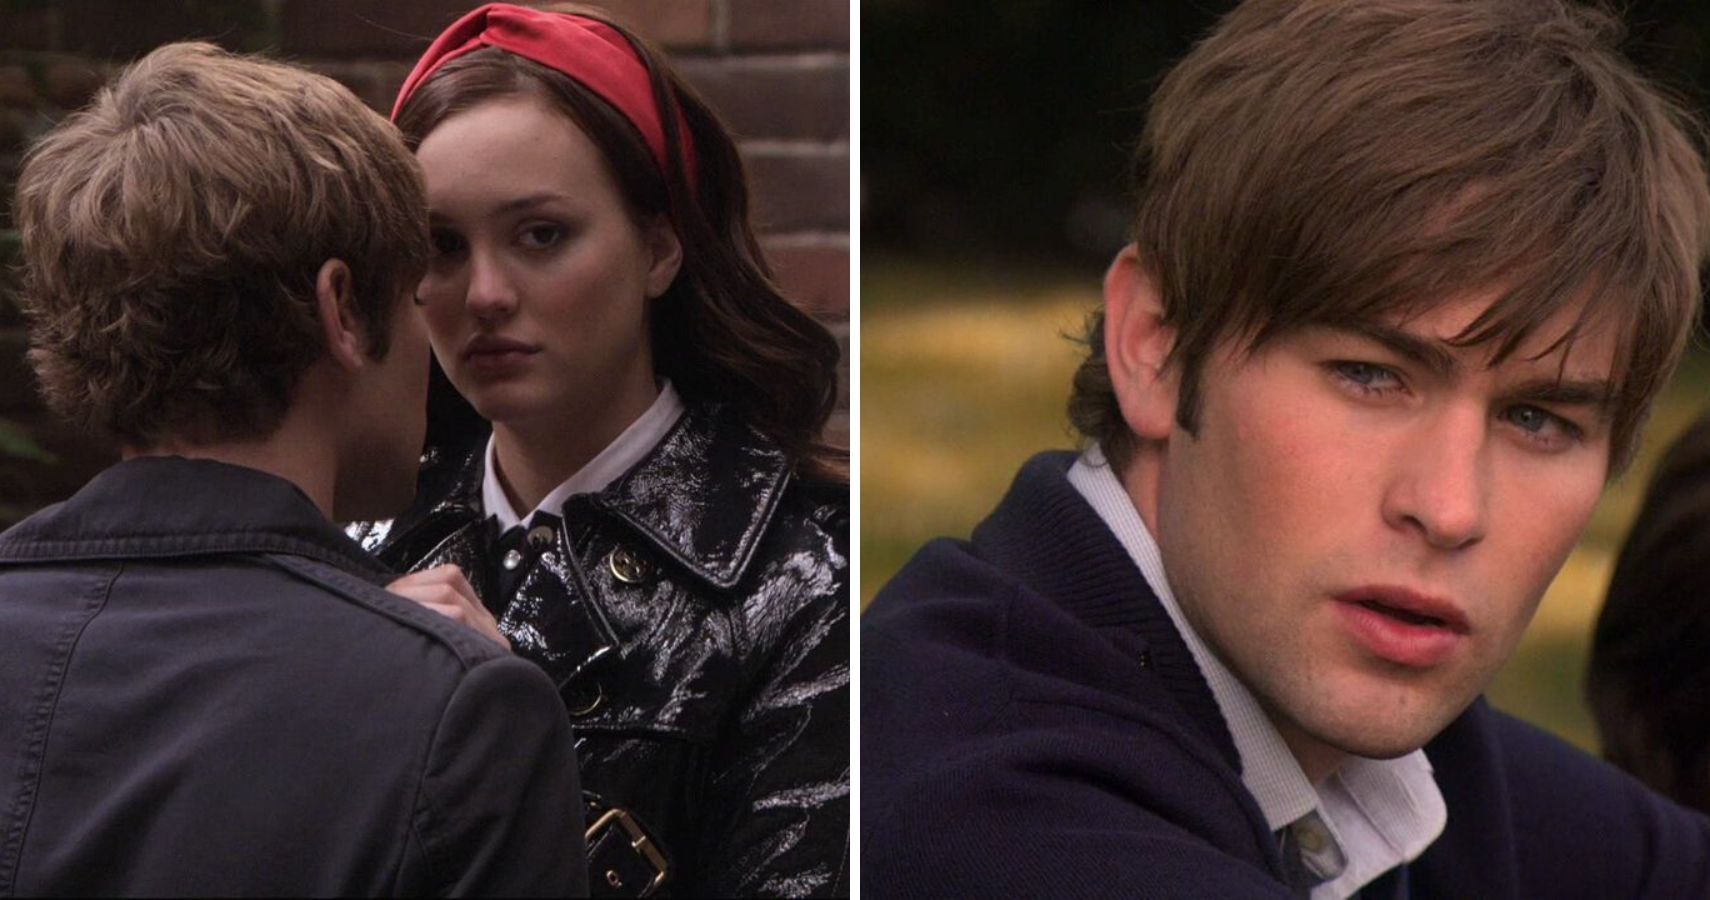 Gossip Girl: 5 Worst Things Nate Did To Blair (& 5 Worst Blair Did To Him)